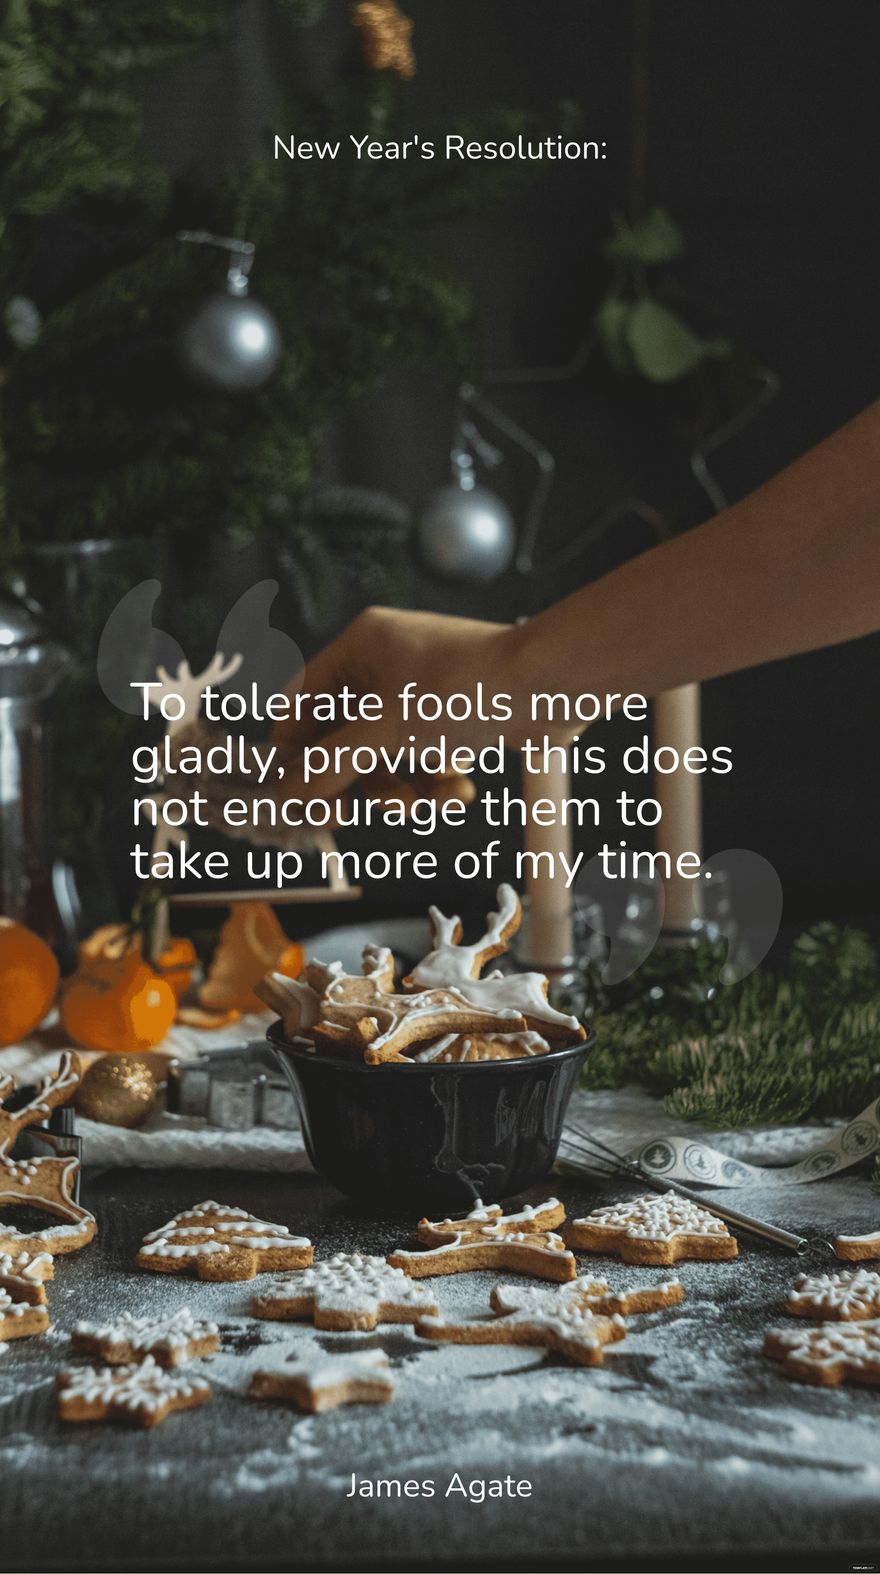 New Year's Resolution: To tolerate fools more gladly, provided this does not encourage them to take up more of my time.